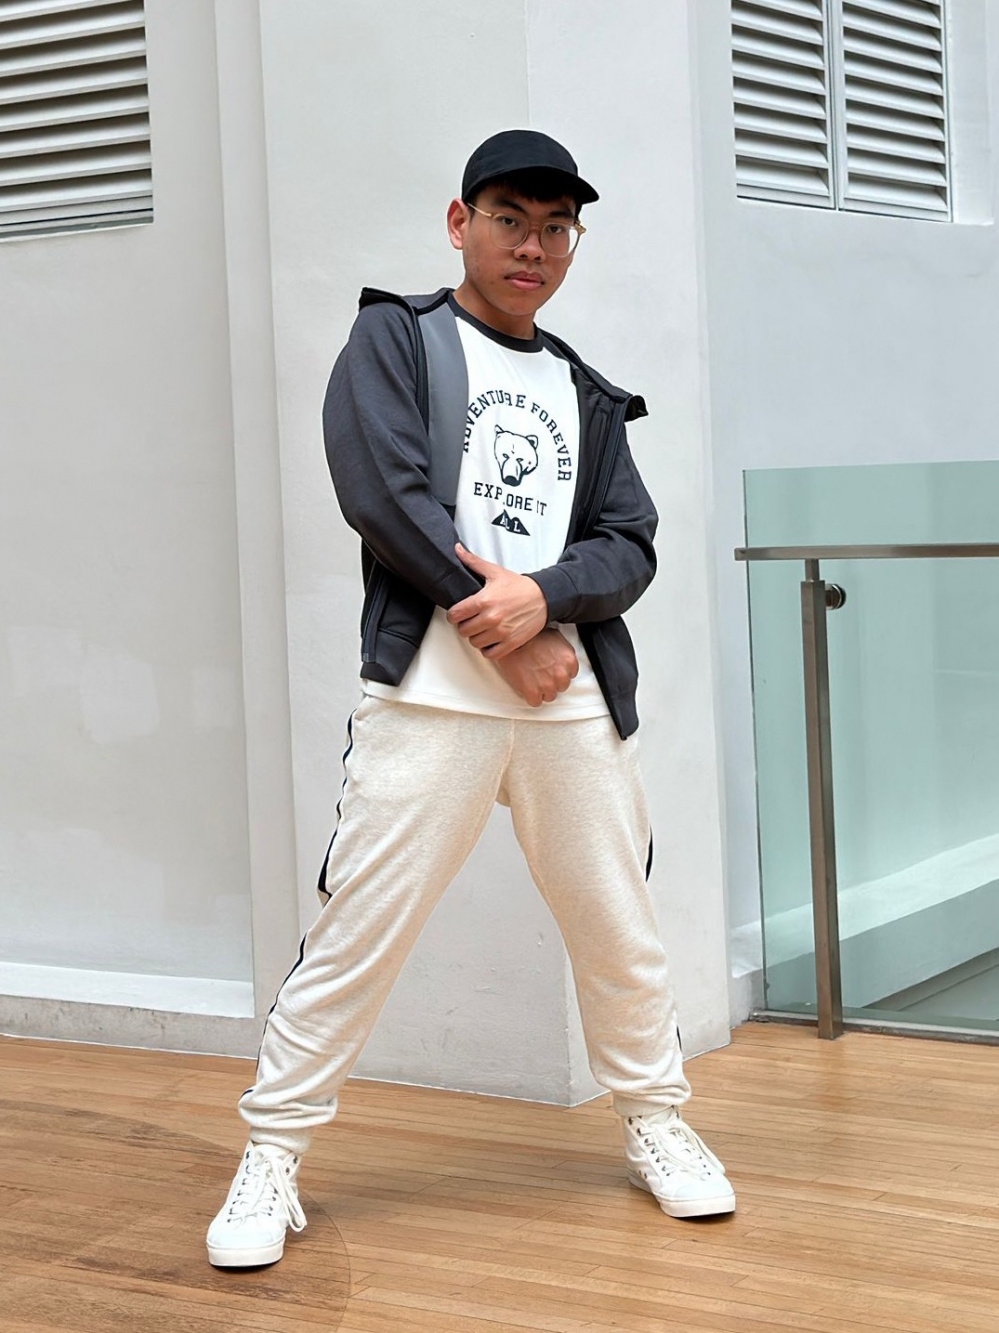 Check styling ideas for「Sweat Pants」